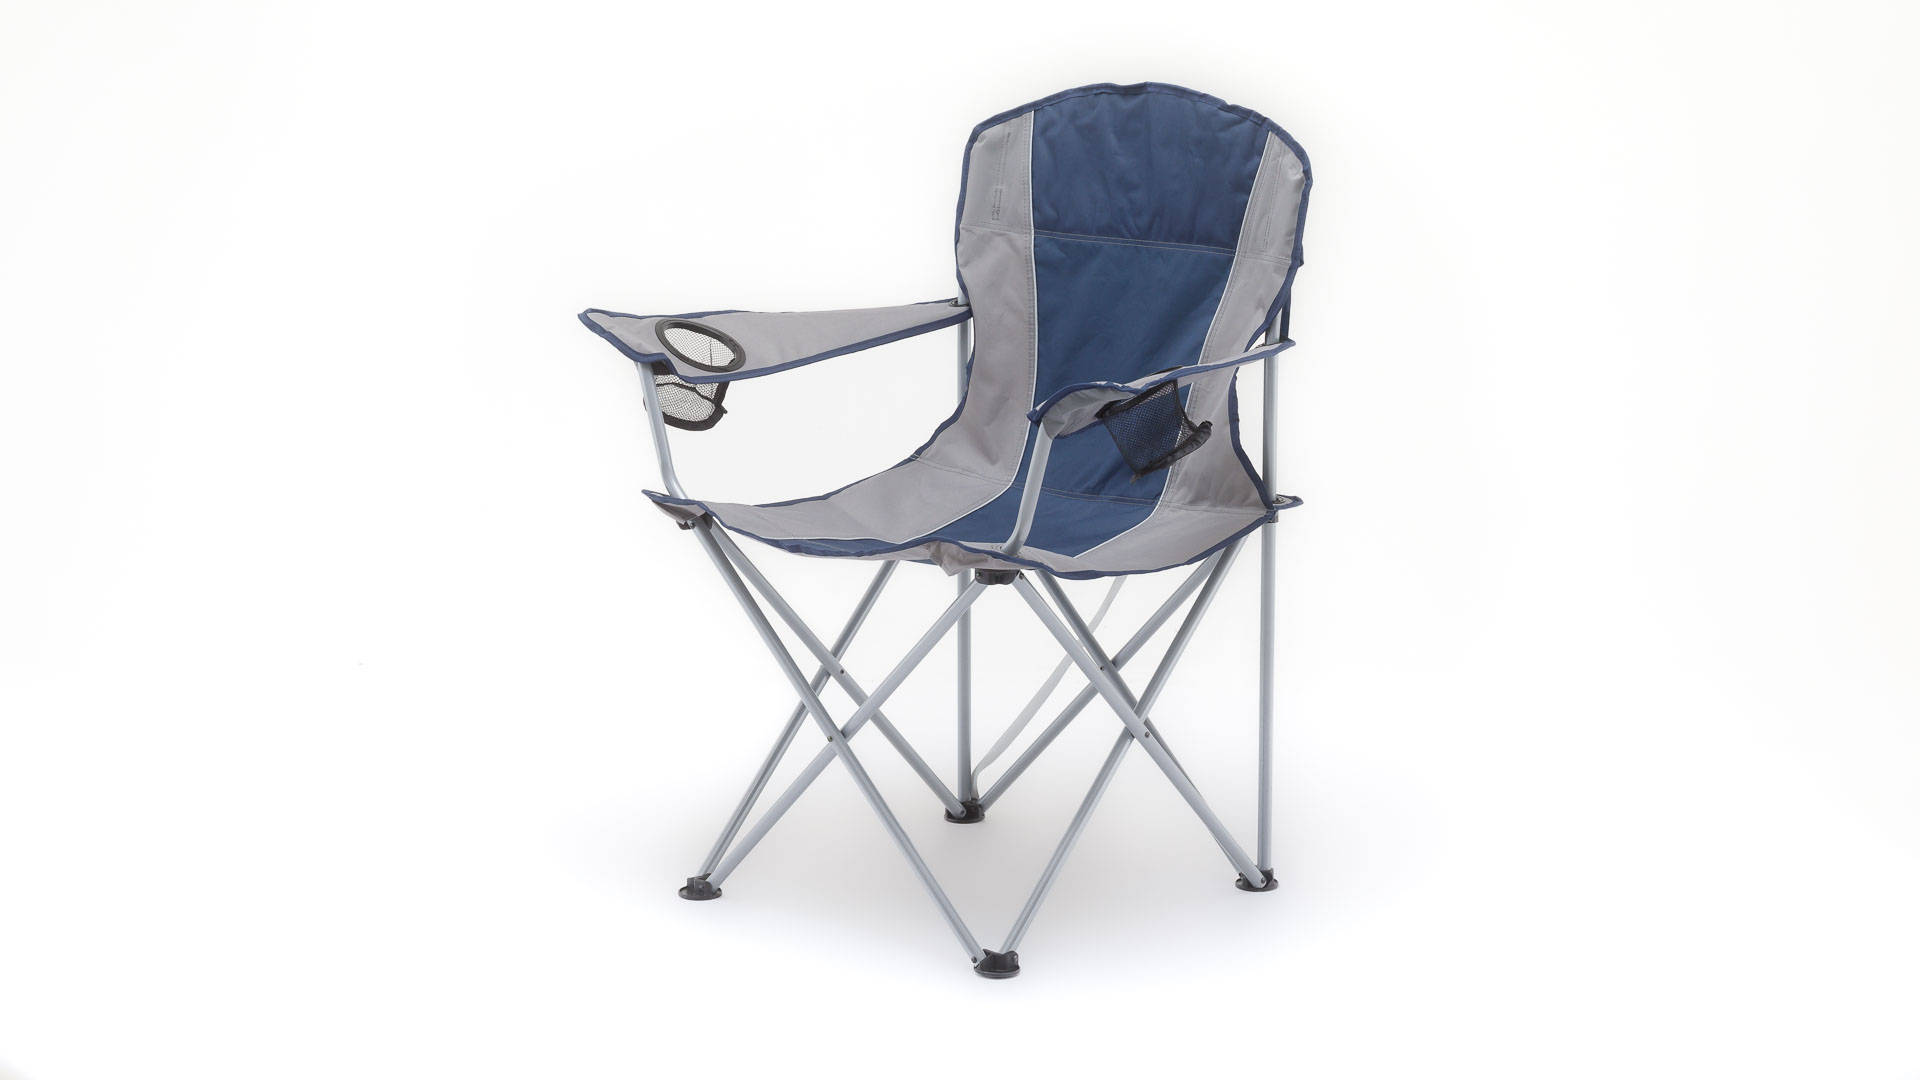 Ozark Trail Oversized Quad Camping Chair, Blue Cove 